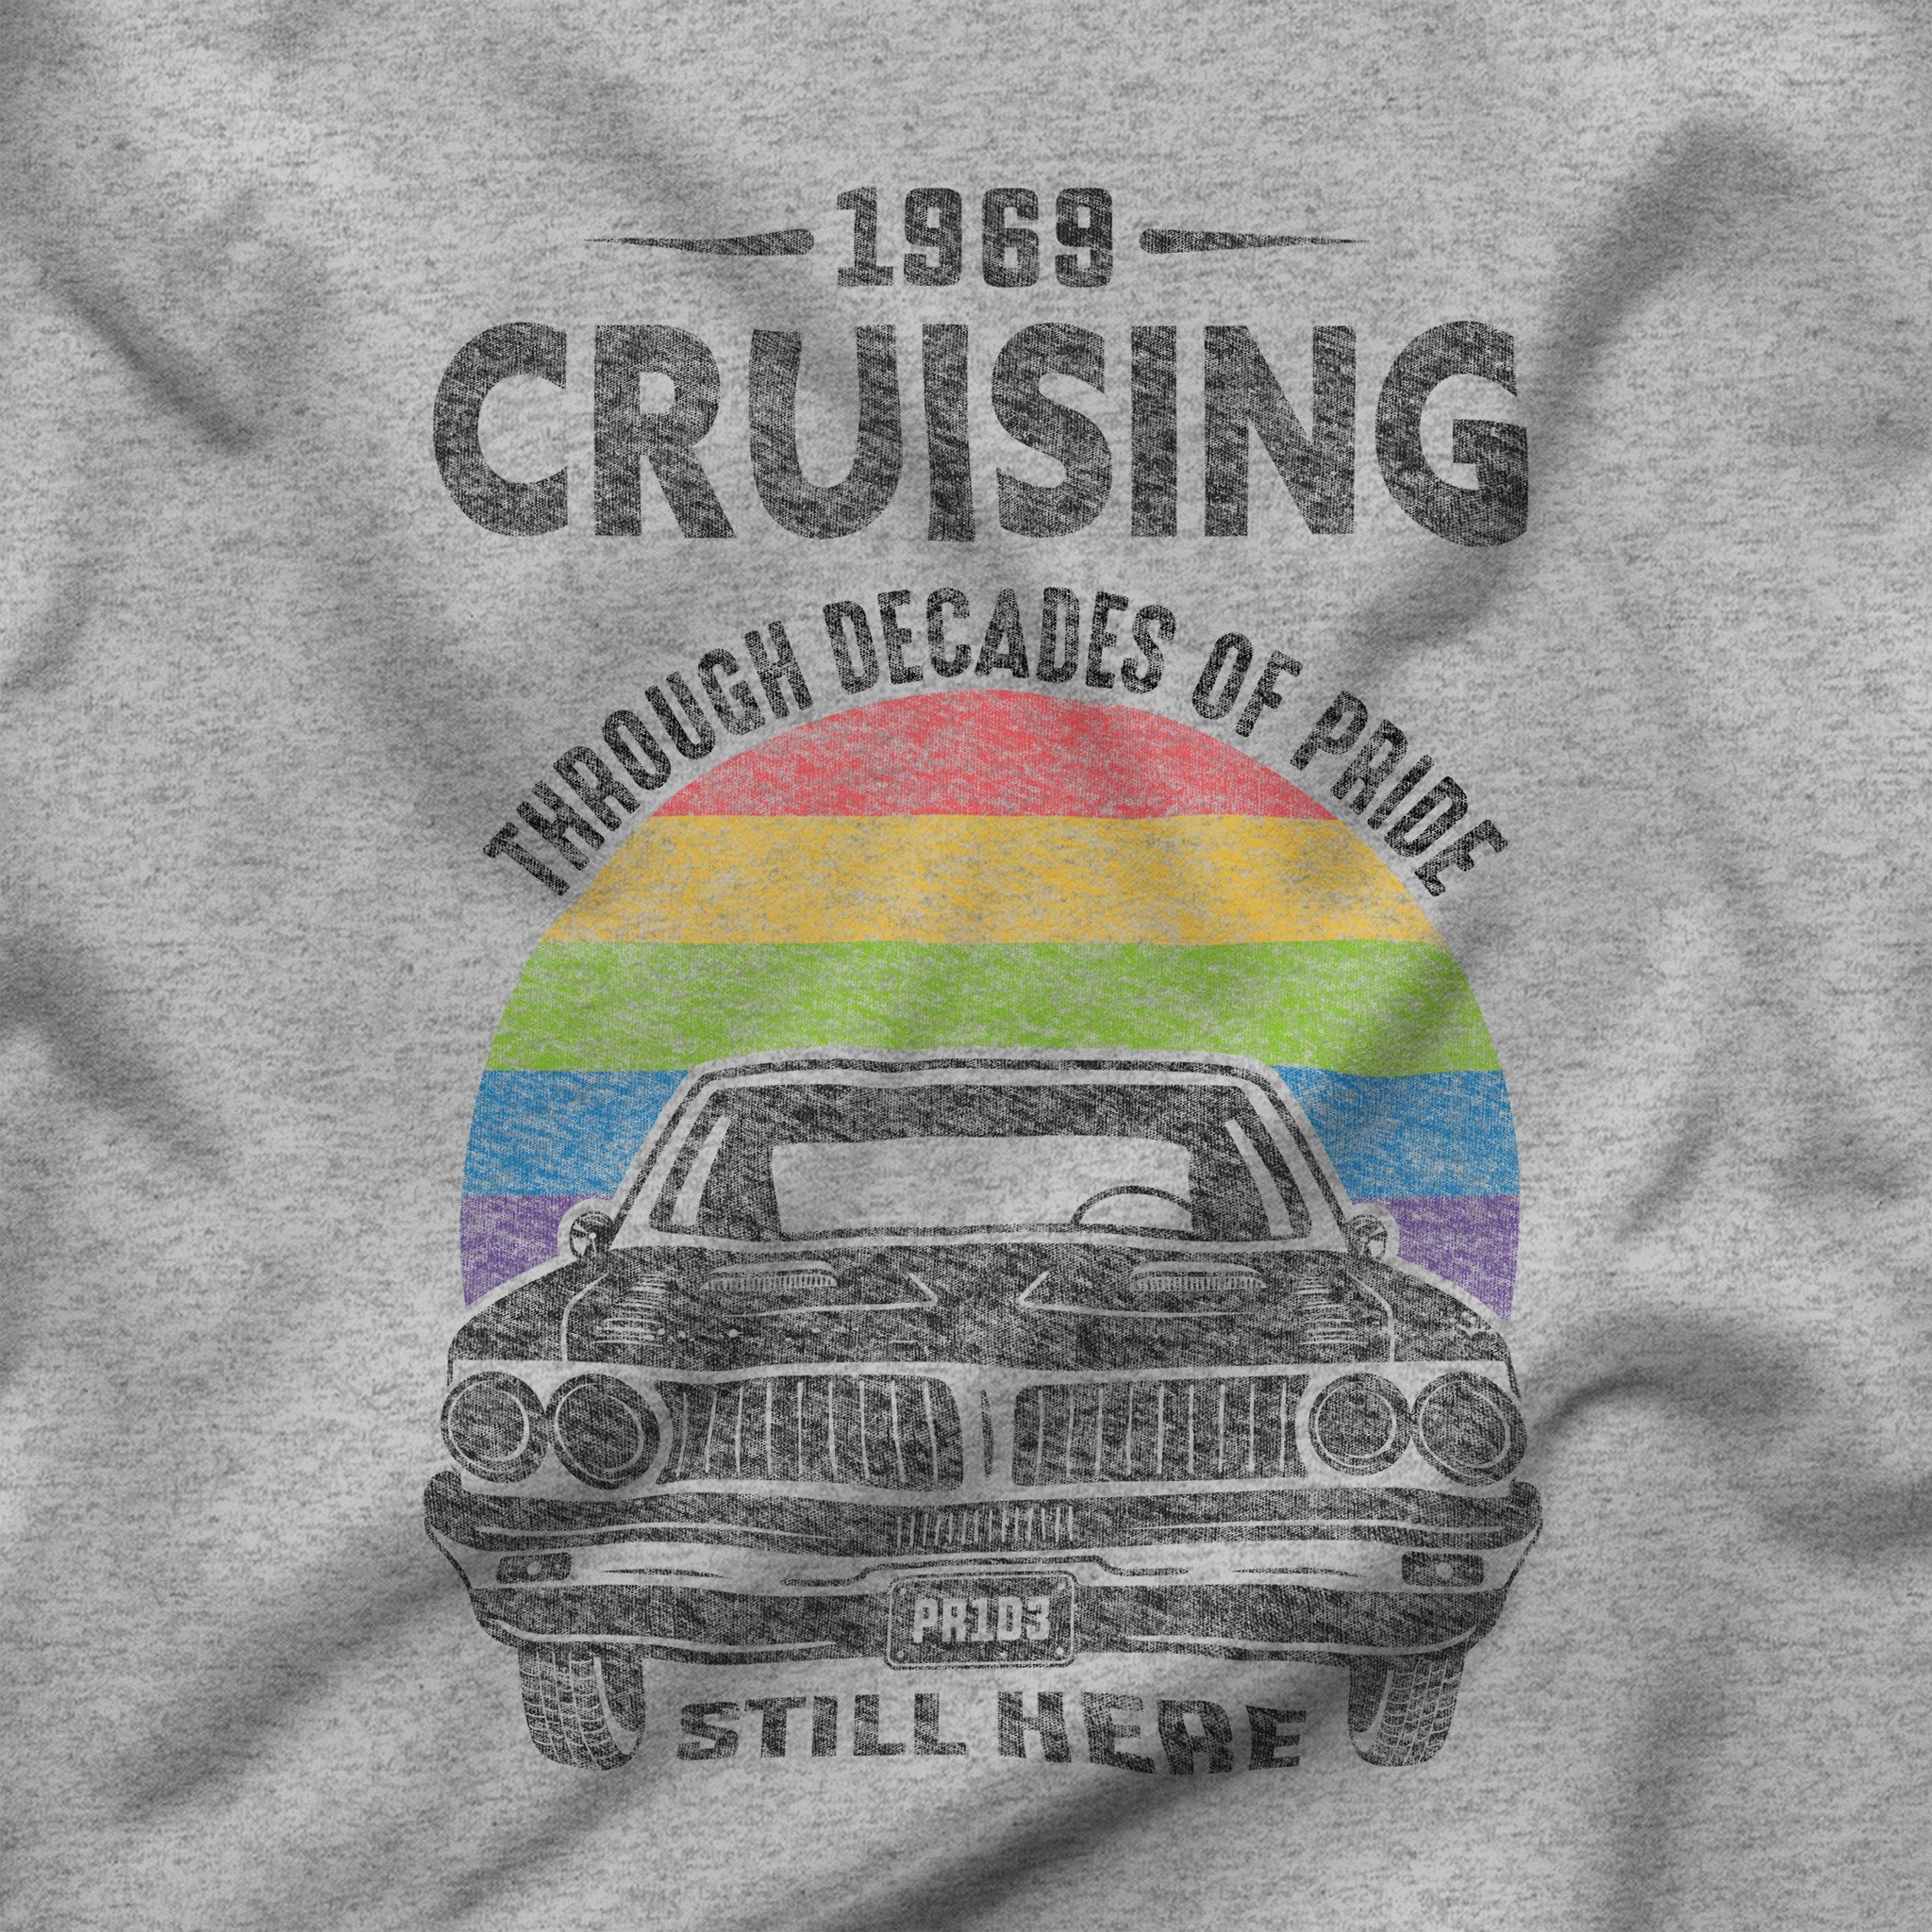 "Cruising Through Decades of Pride" Vintage Muscle Car T-Shirt - Hunky Tops